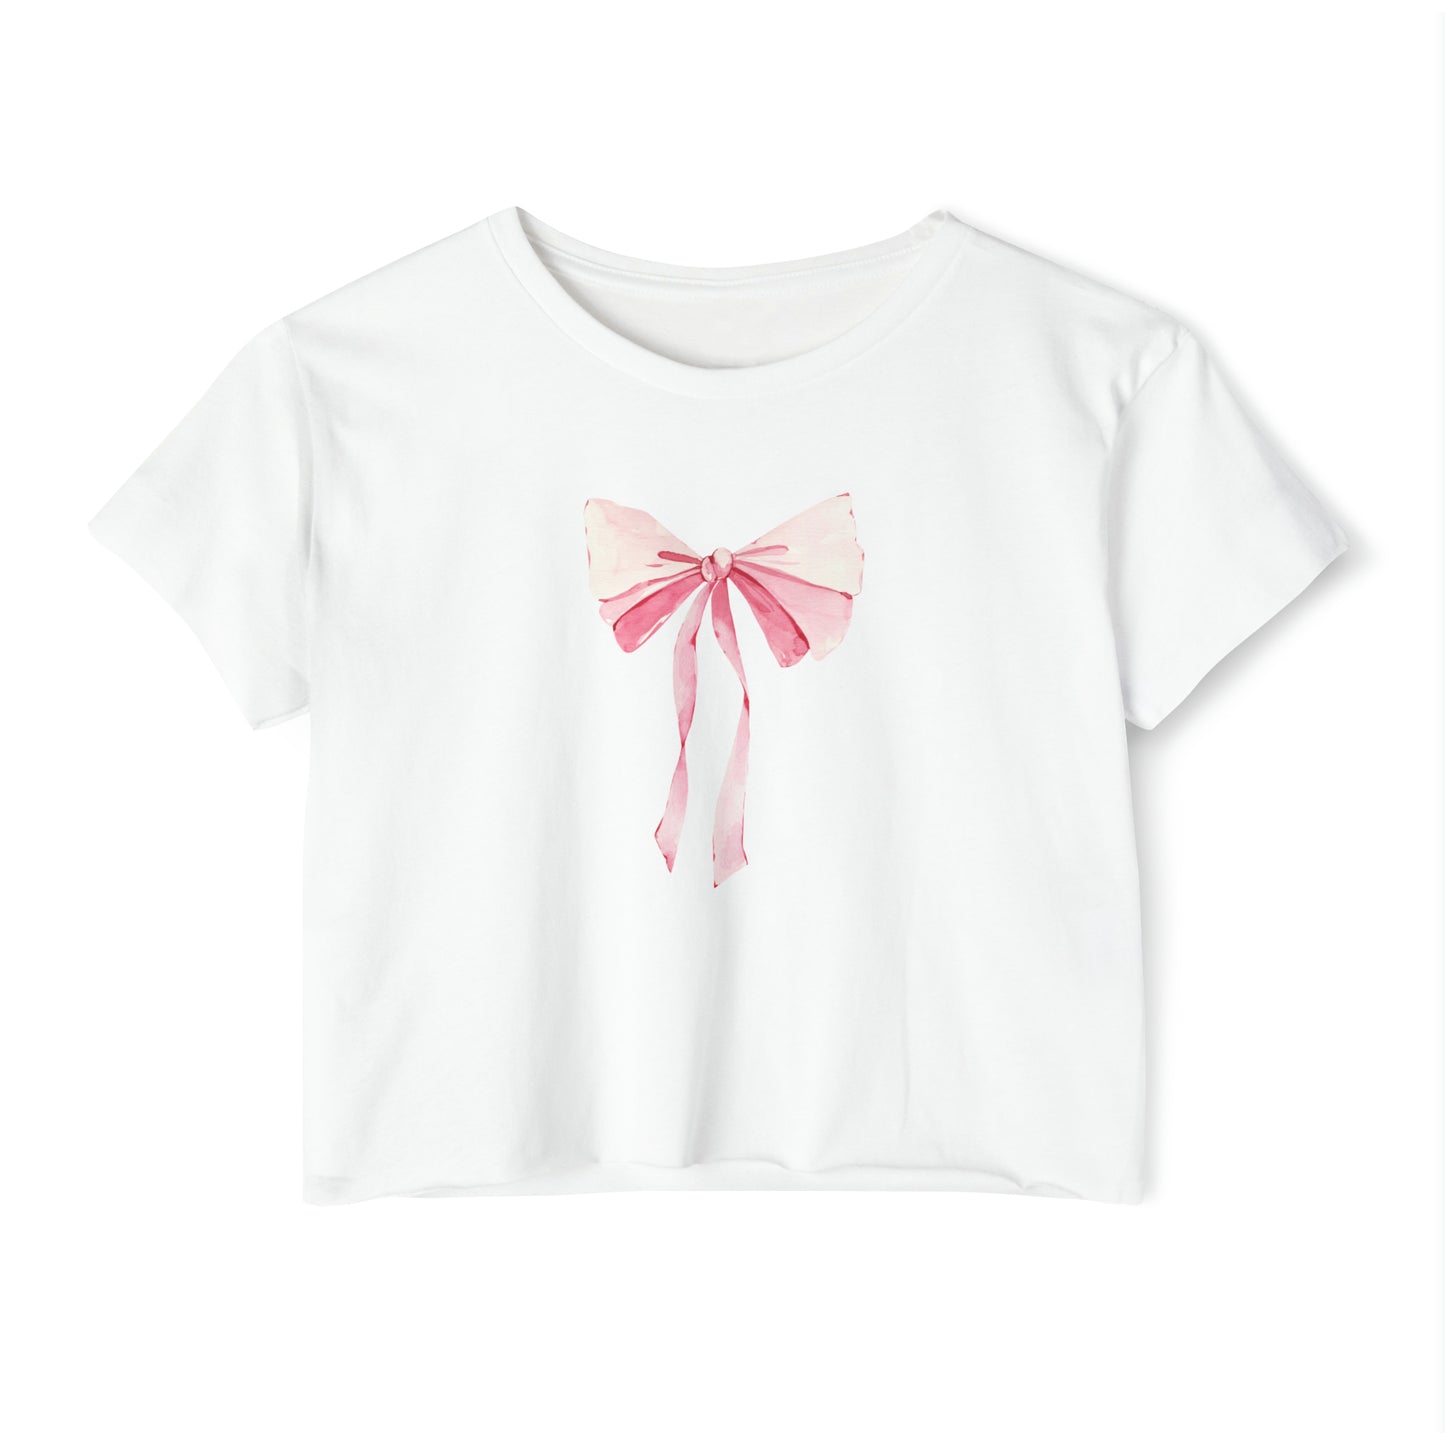 Pink Bow Baby Tee, Coquette Tee, Gift for Her, Dollette Top, Pink Bow Crop Top